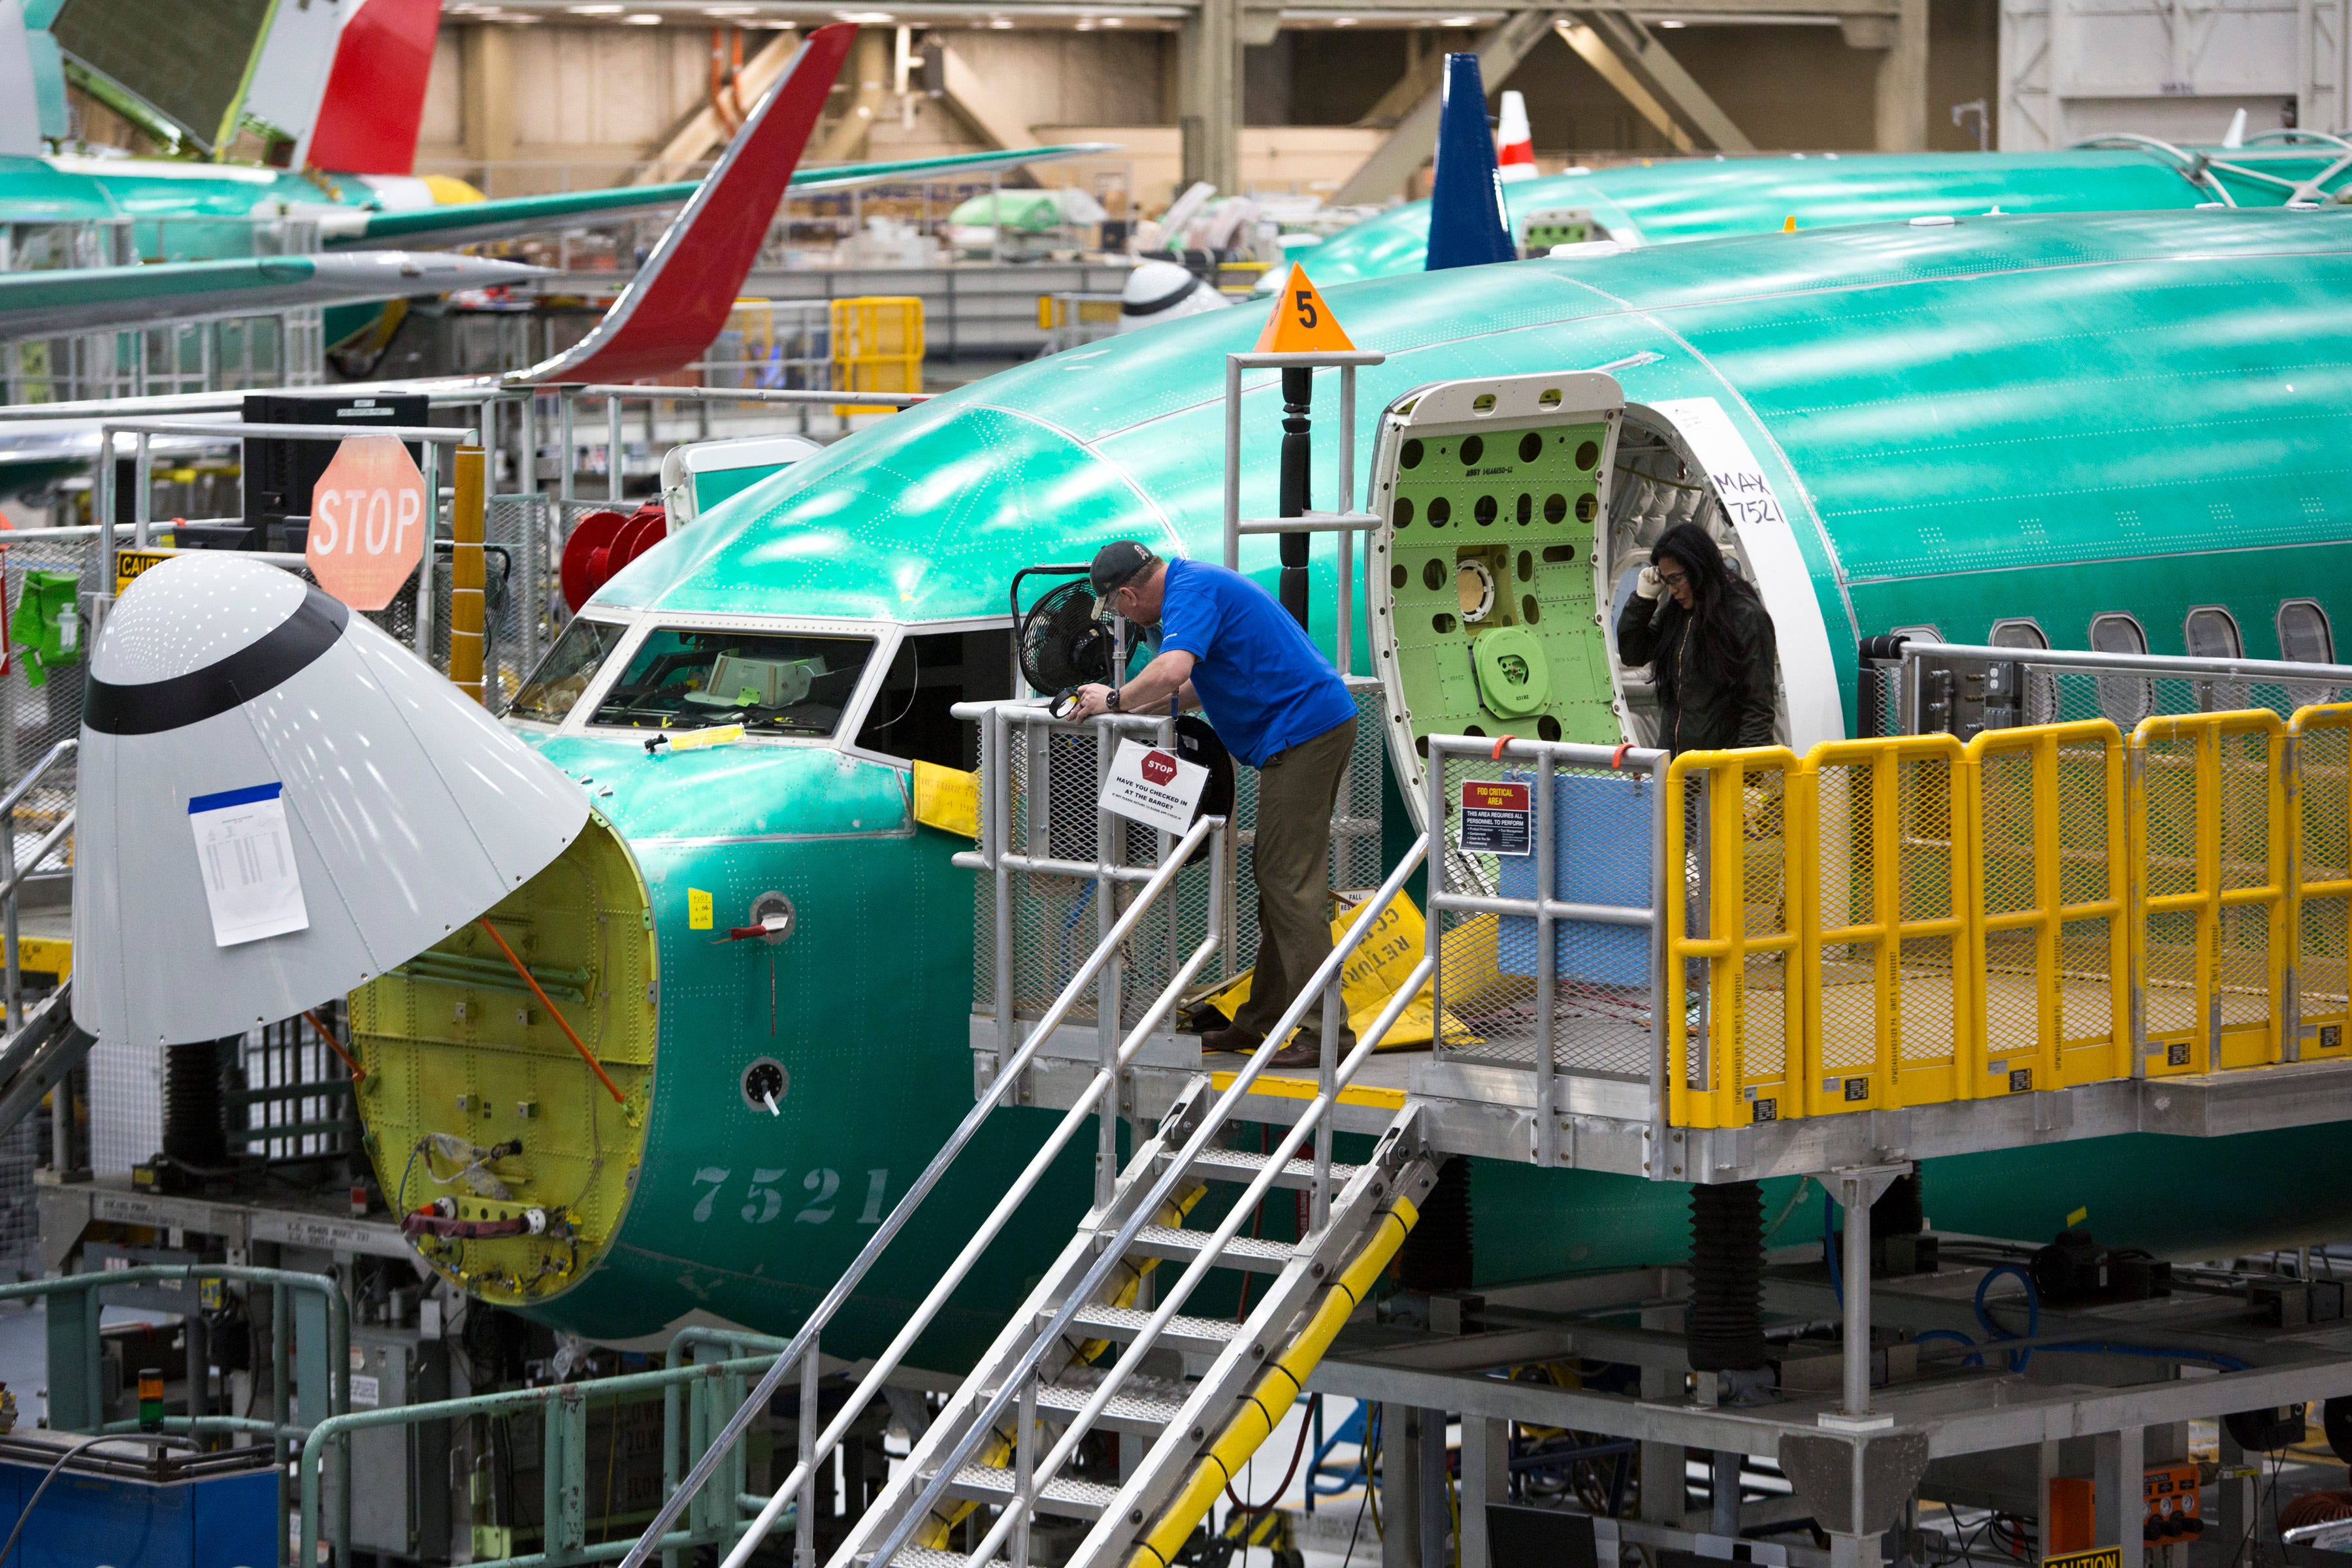 boeing whistleblower says he urged alaska airlines to ground the 737 max before blowout — and calls regulators 'horribly asleep at the wheel'